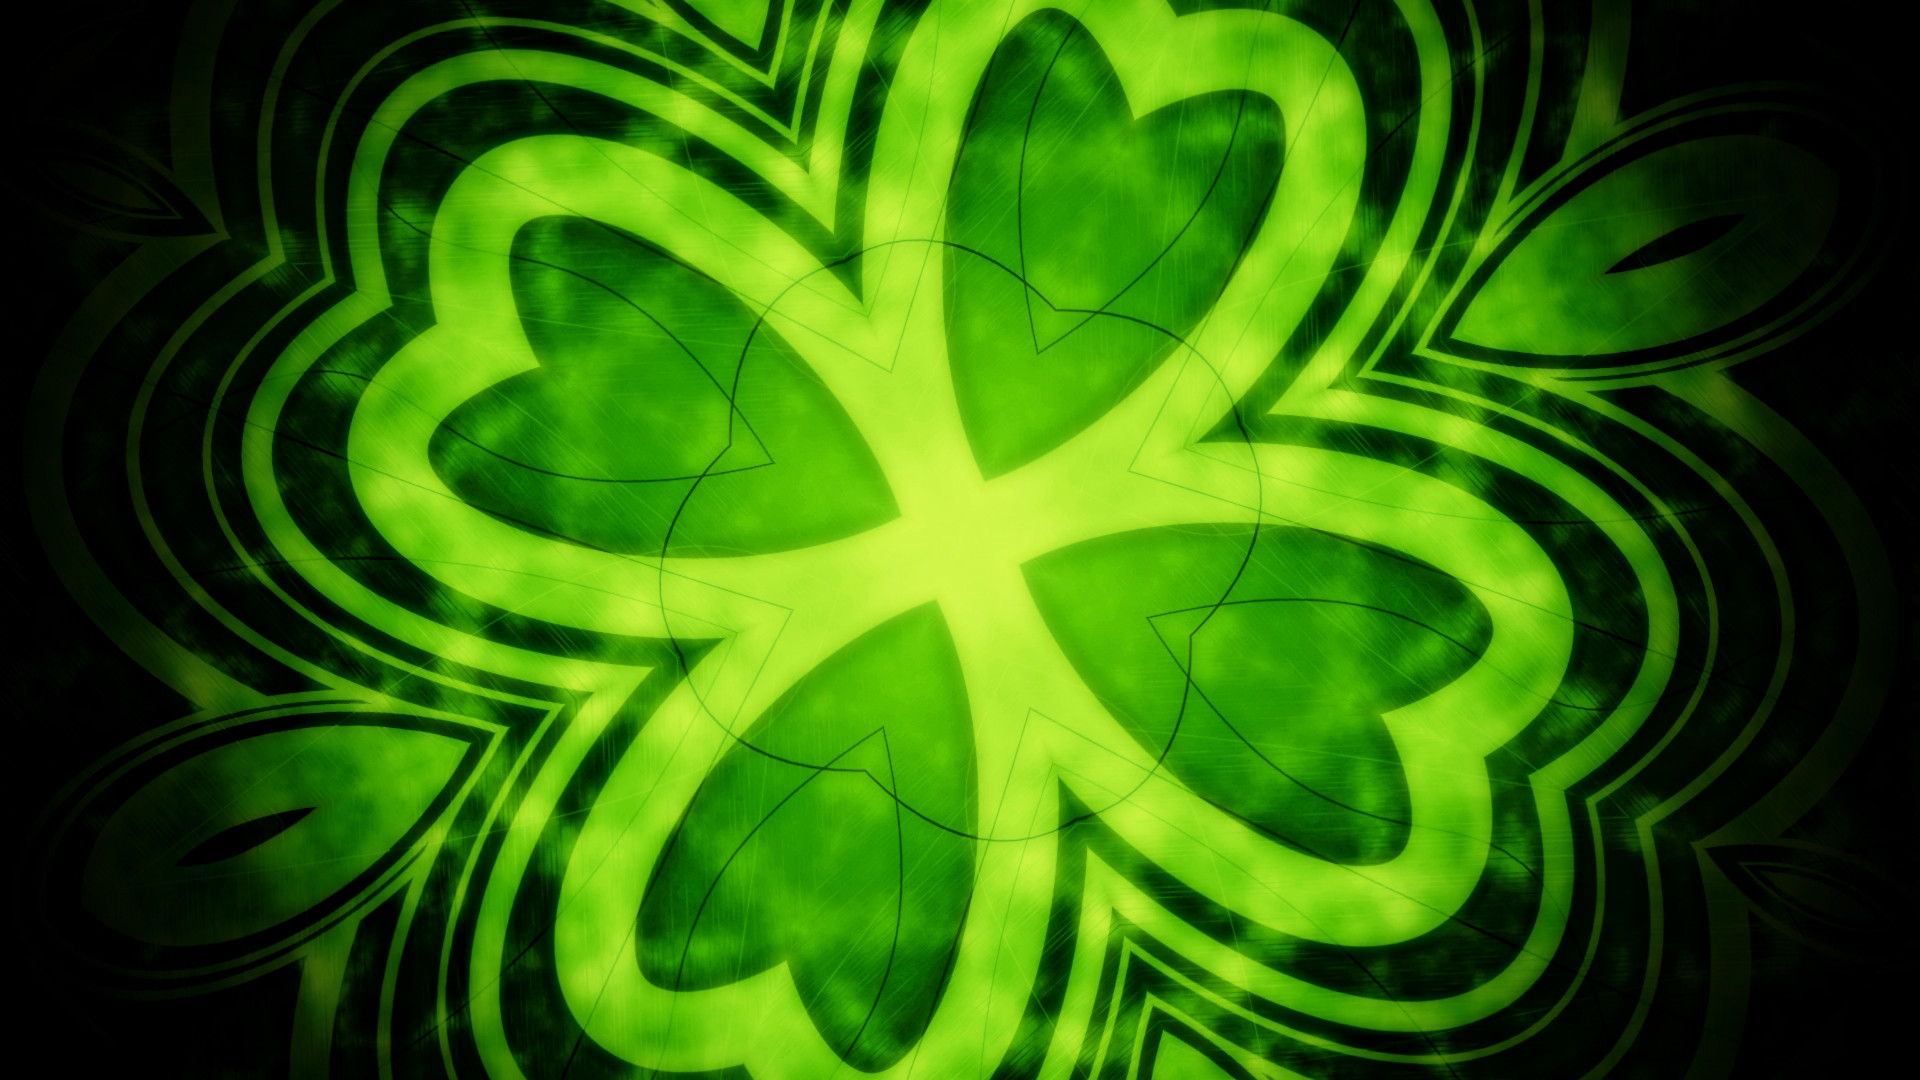 1920x1080 15 lucky Android wallpapers for St. Patricks Day | AndroidGuys